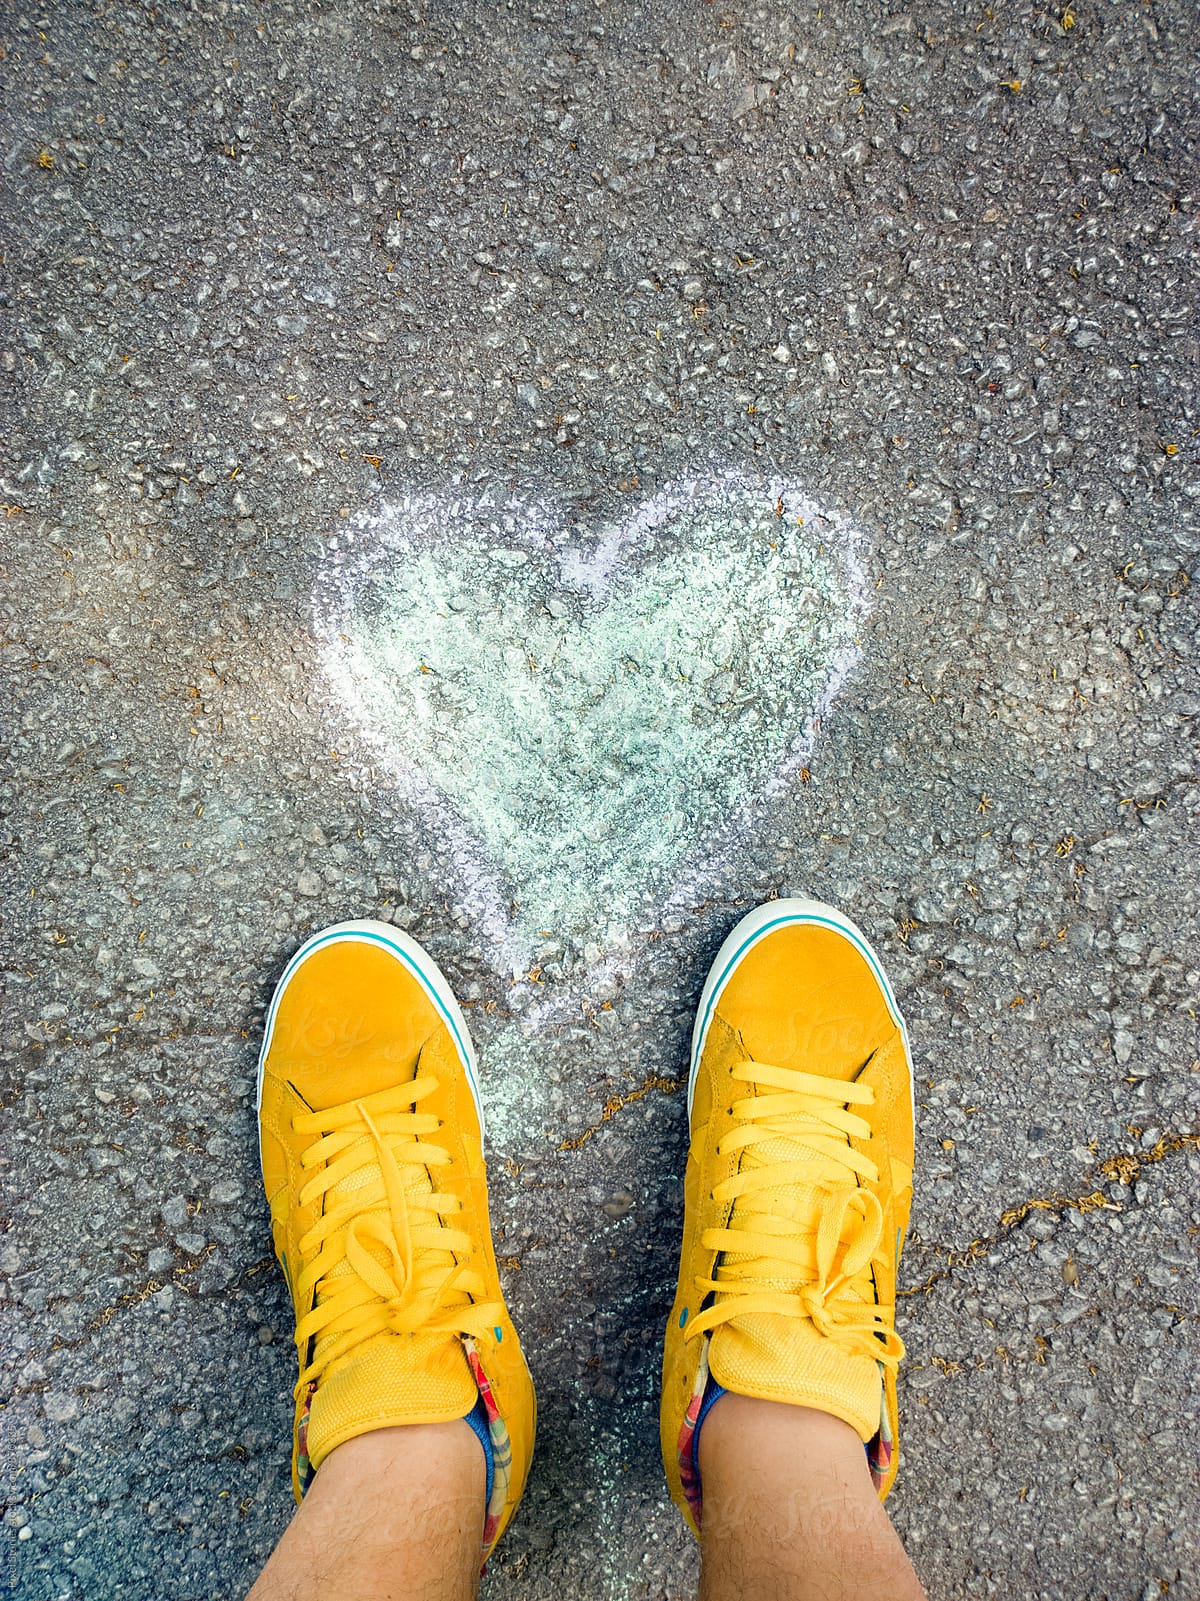 First-person view of feet standing in front of heart